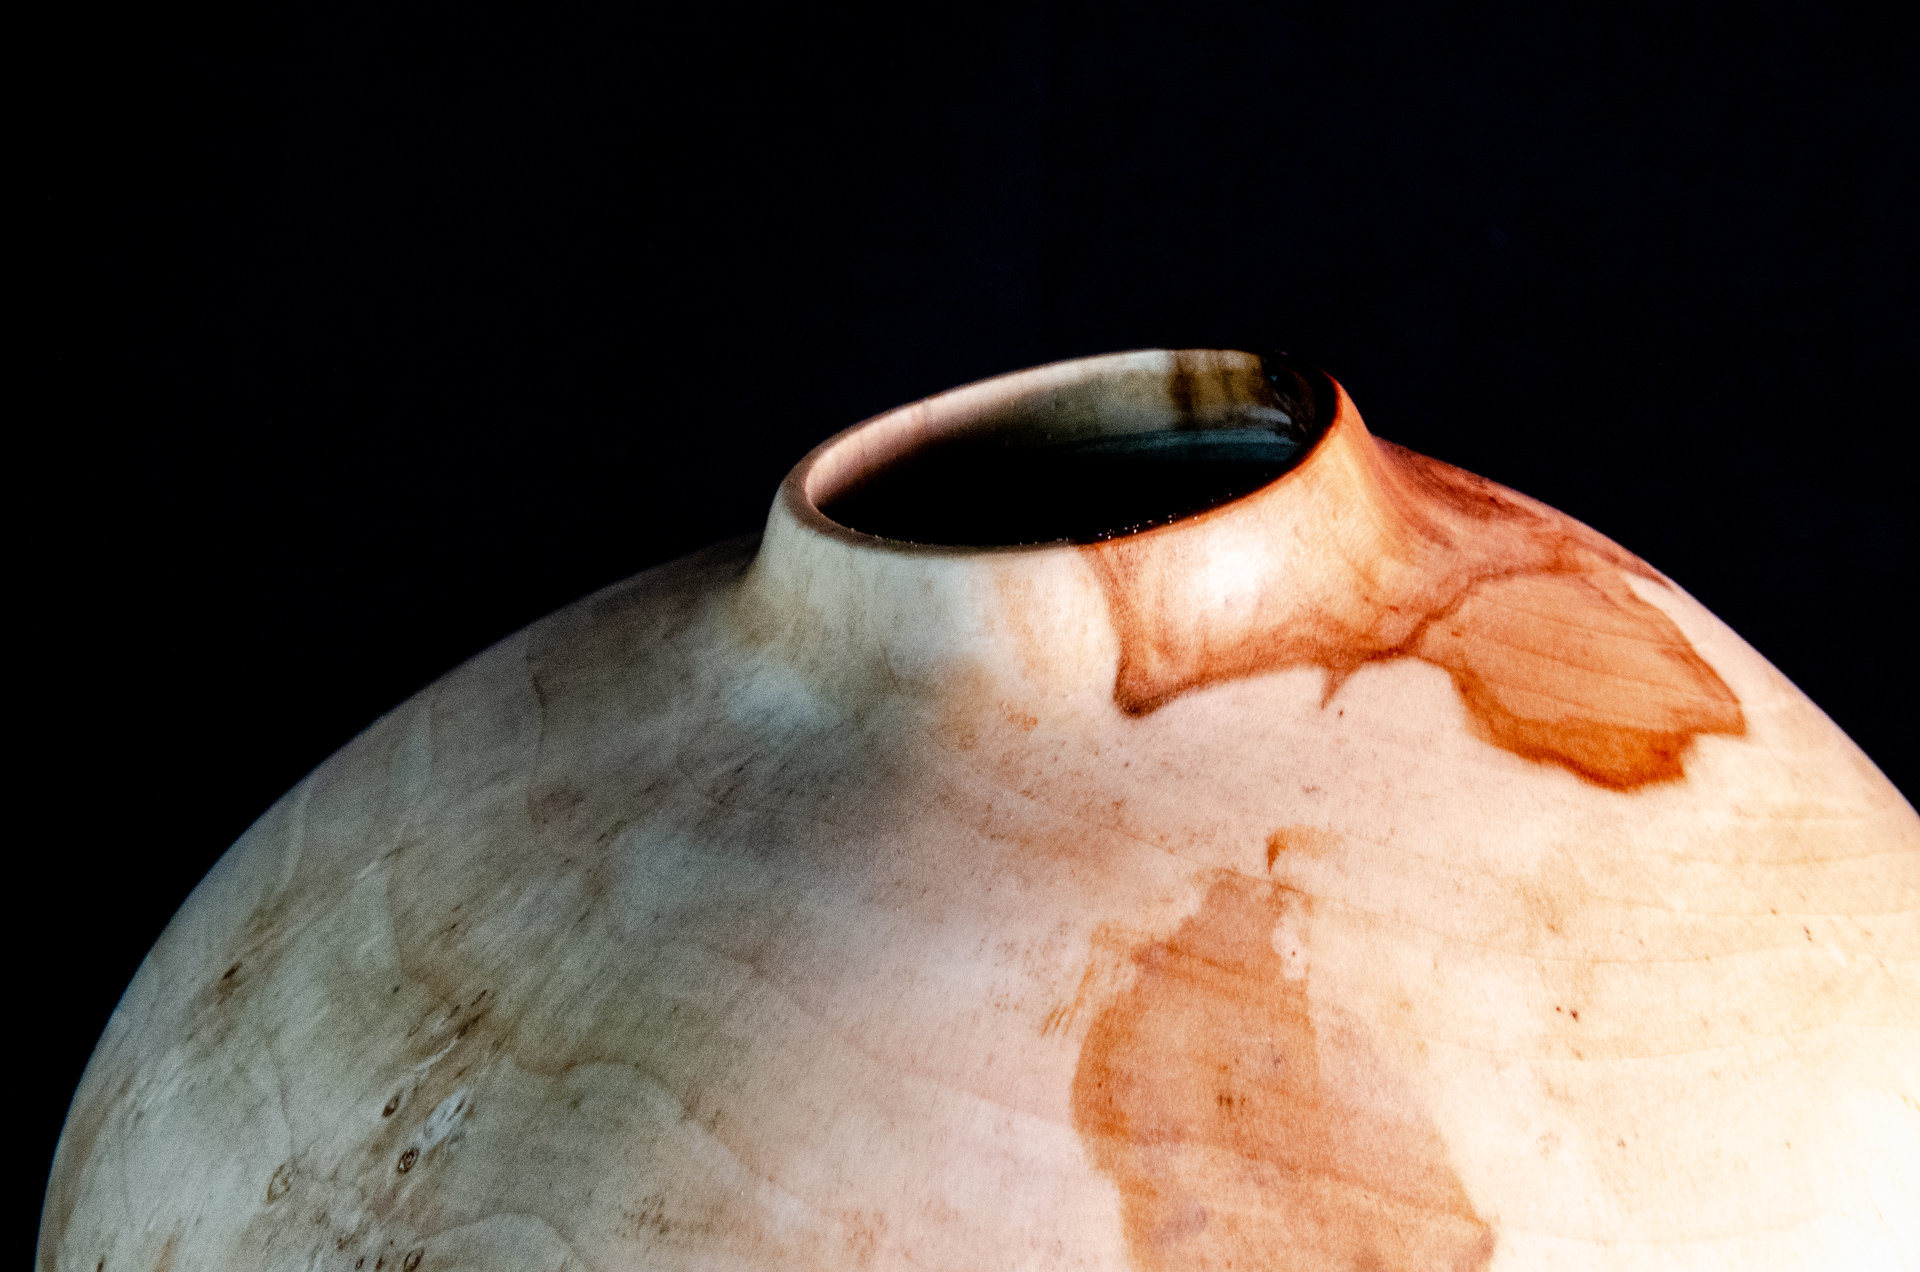 Apple hollow form (detail)